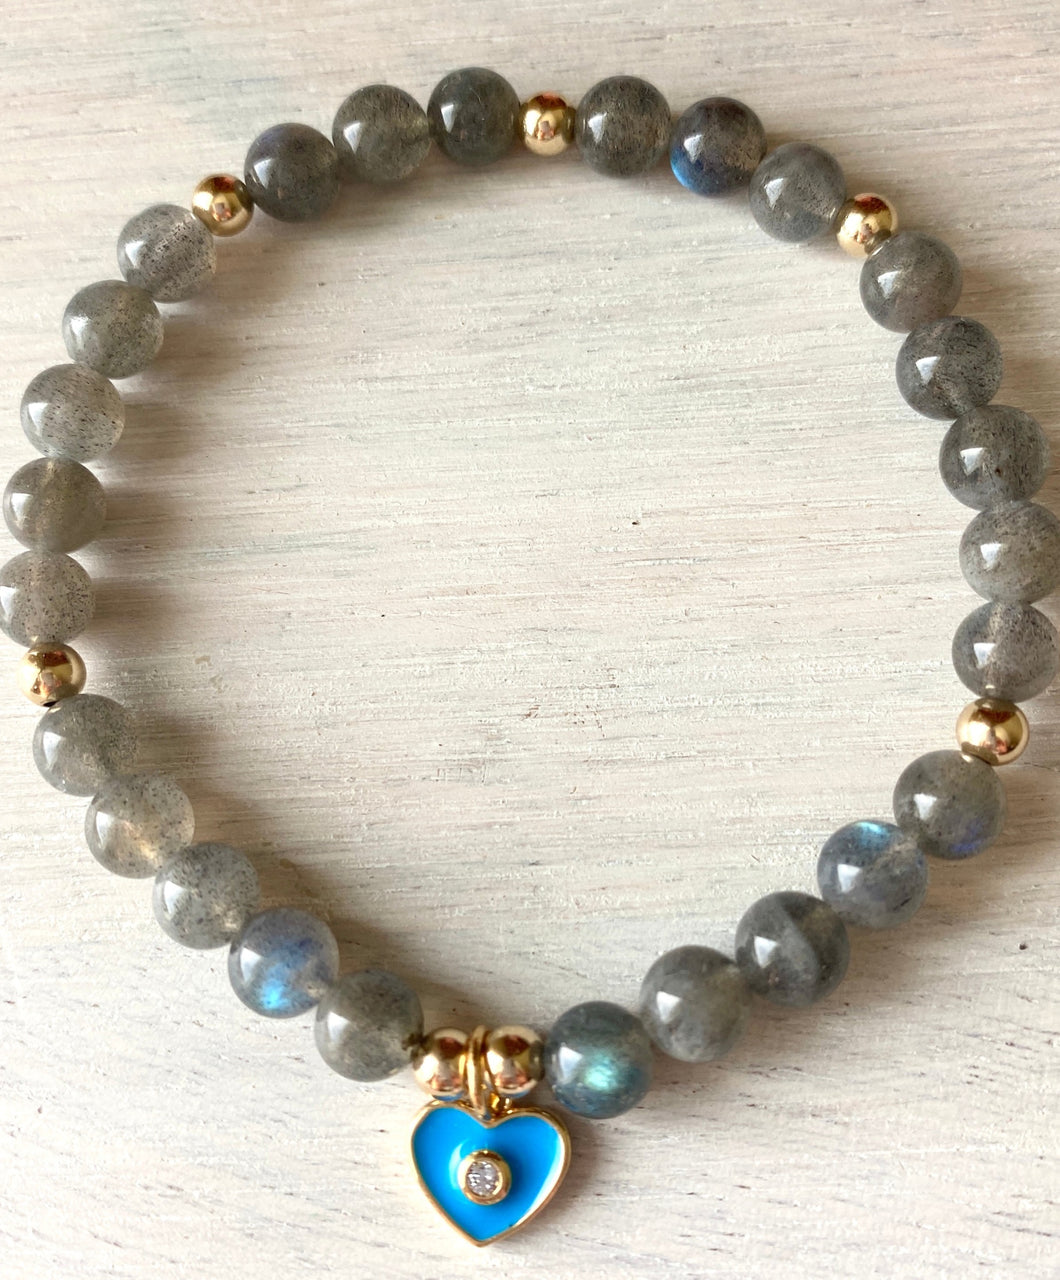 6MM Labradorite with Blue Enameled Heart